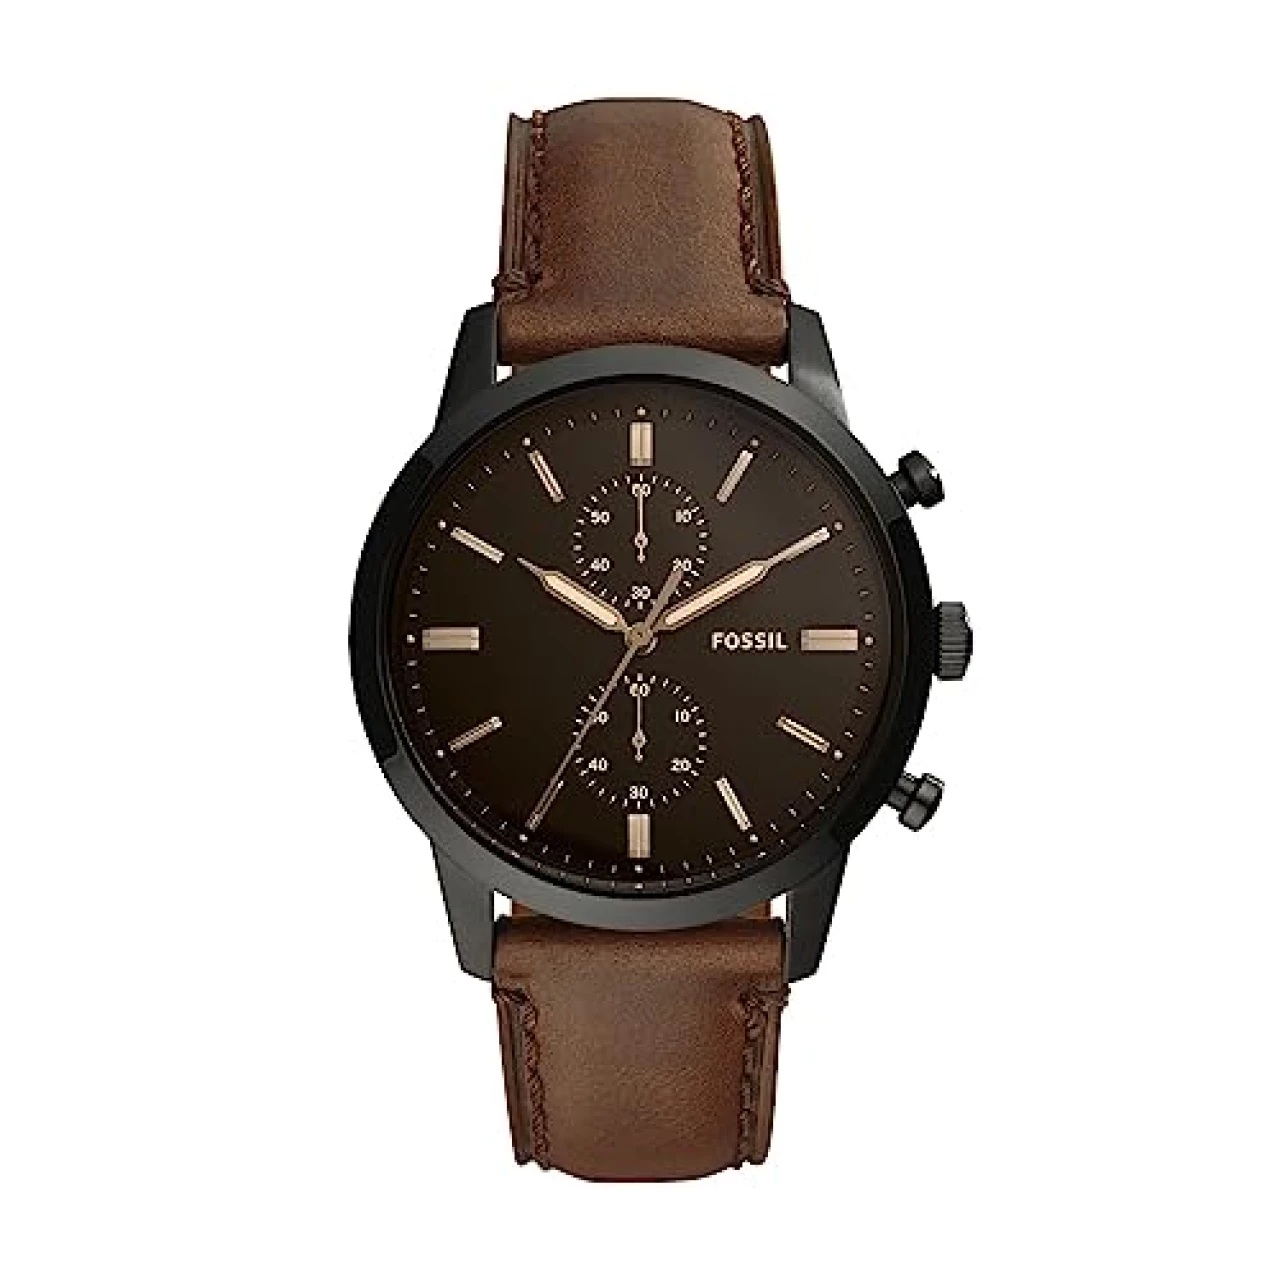 Fossil Men&rsquo;s Townsman Quartz Stainless Steel and Leather Chronograph Watch, Color: Black, Dark Brown (Model: FS5437)